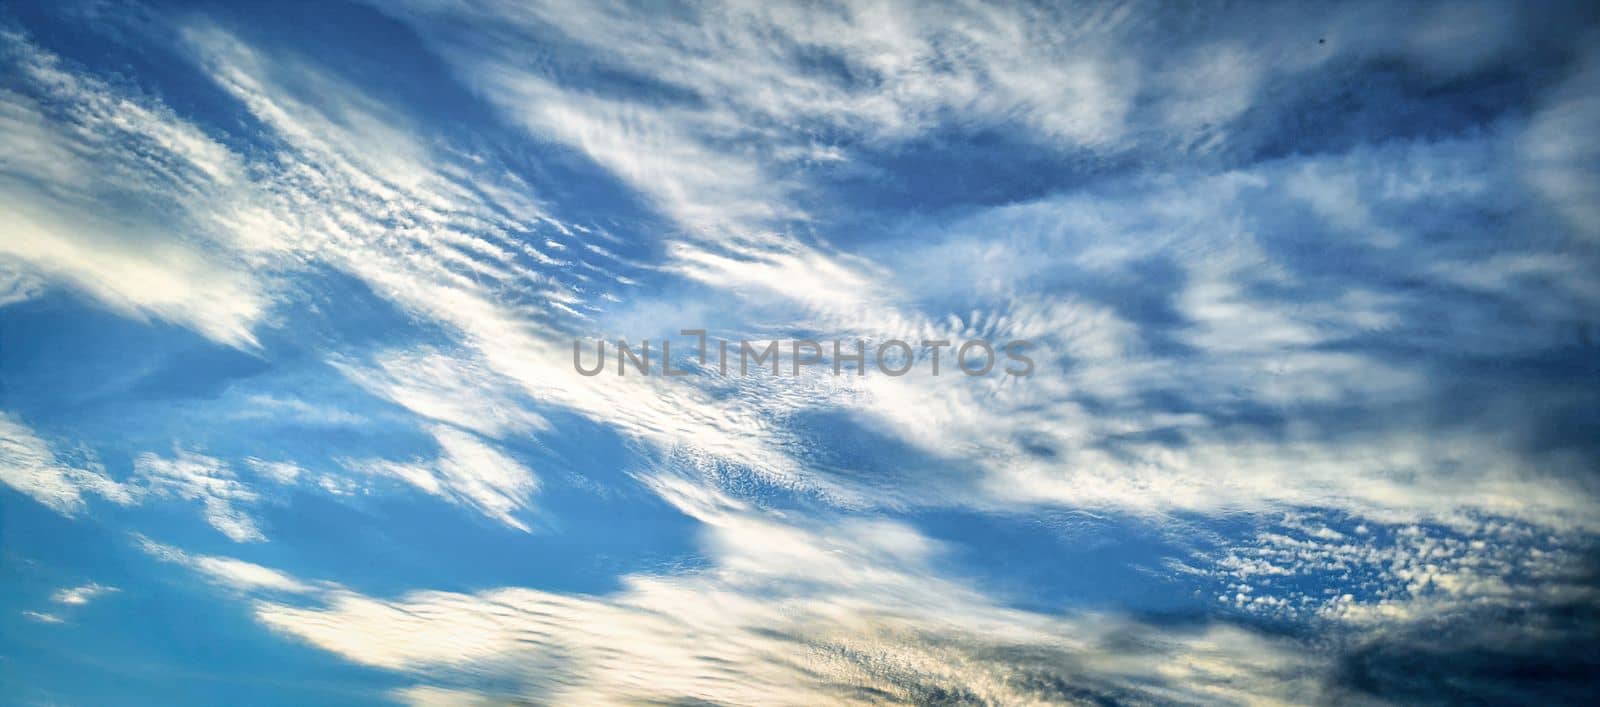 Blue sky with clouds background. download image by igor010